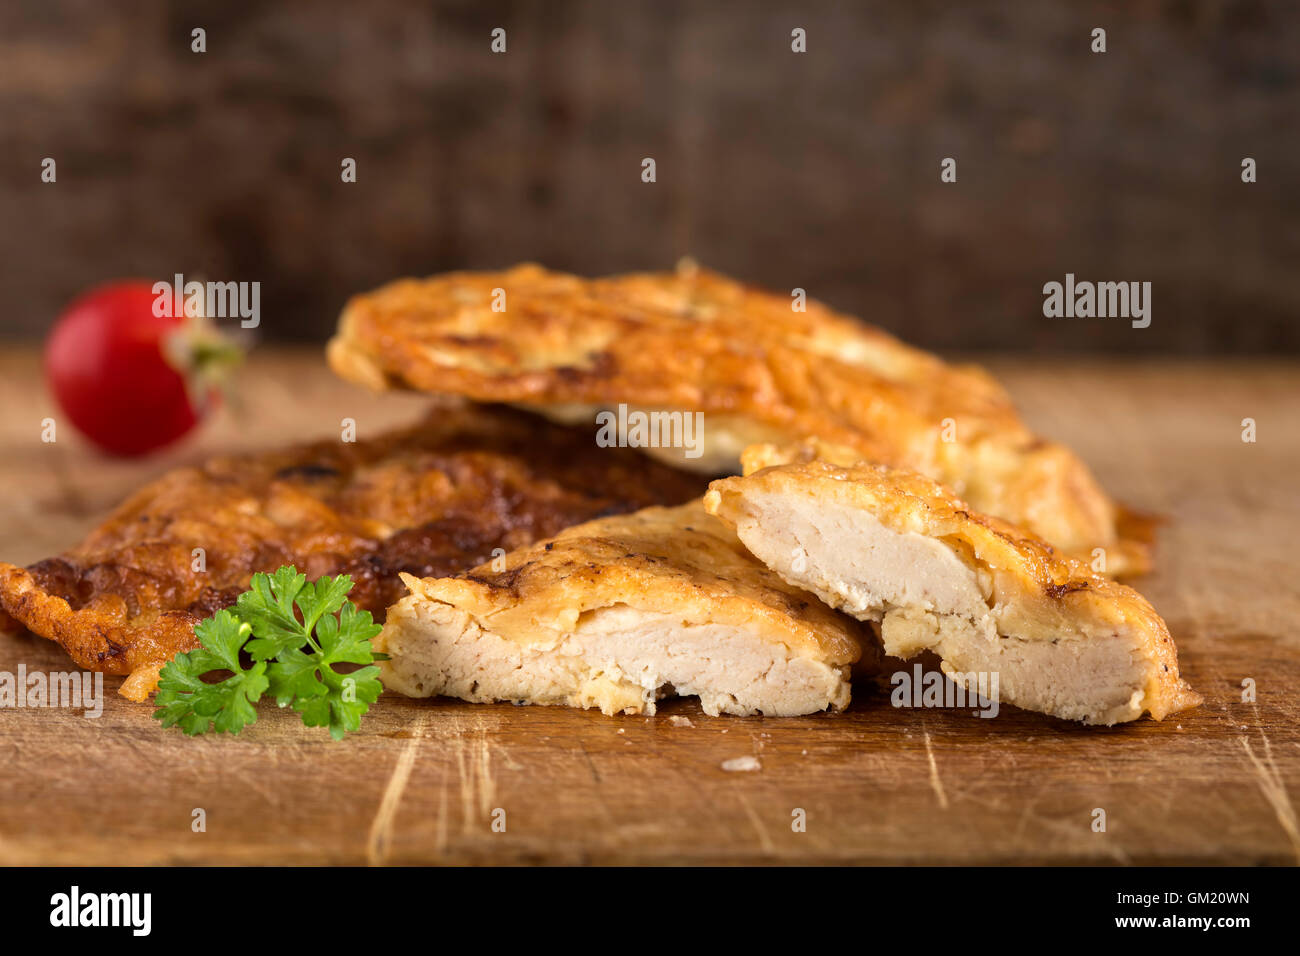 Chicken schnitzel on wood with parsley and tomato Stock Photo